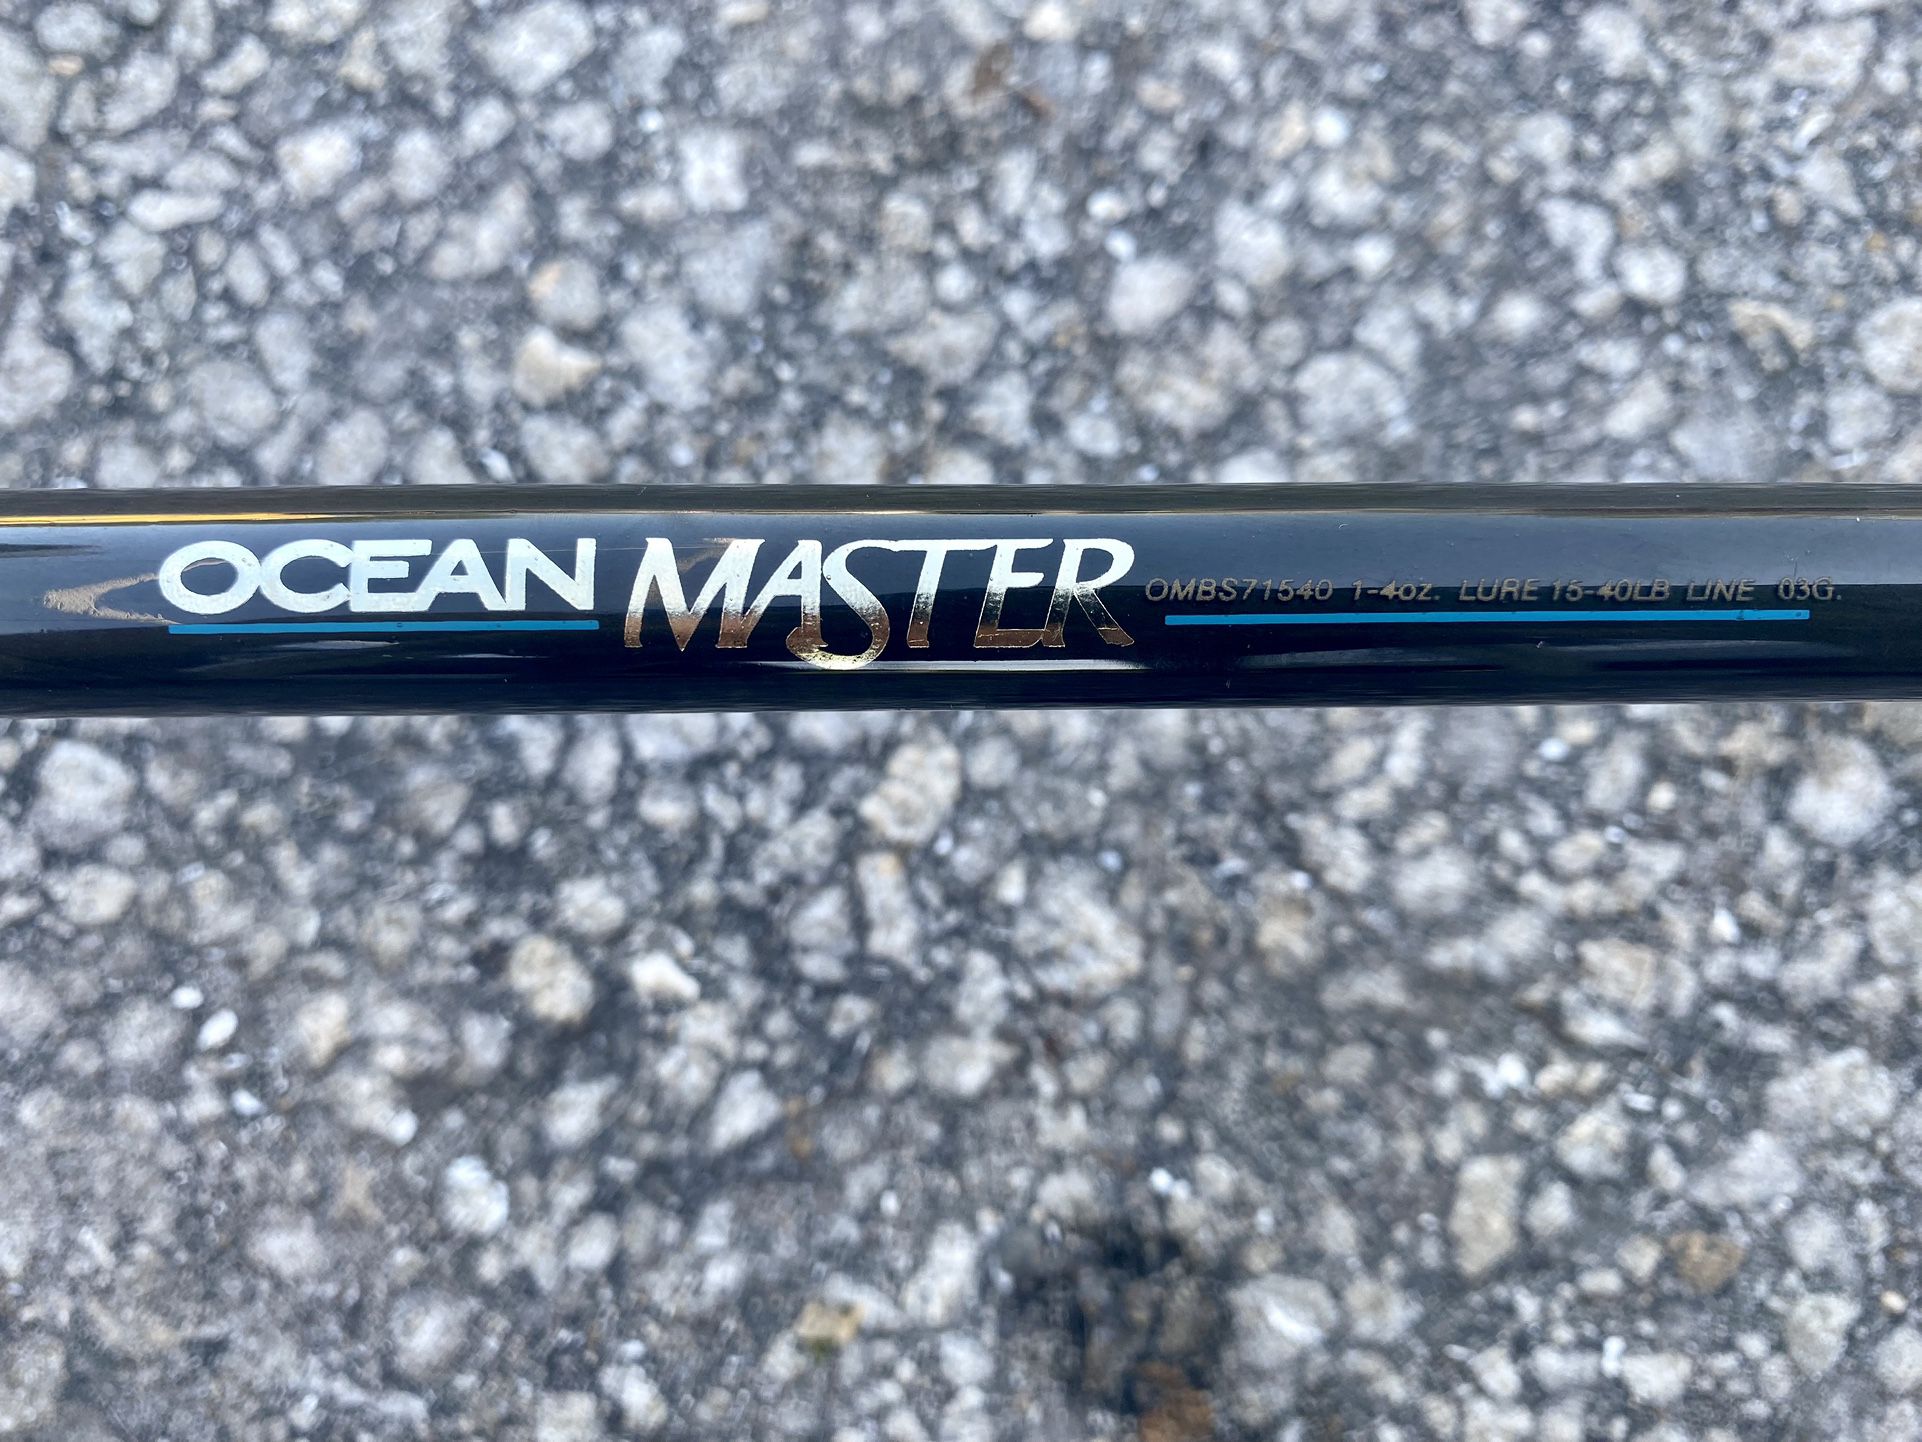 NEW! OCEAN MASTER OFF SHORE ANGLER OMBS71540 for Sale in Pembroke